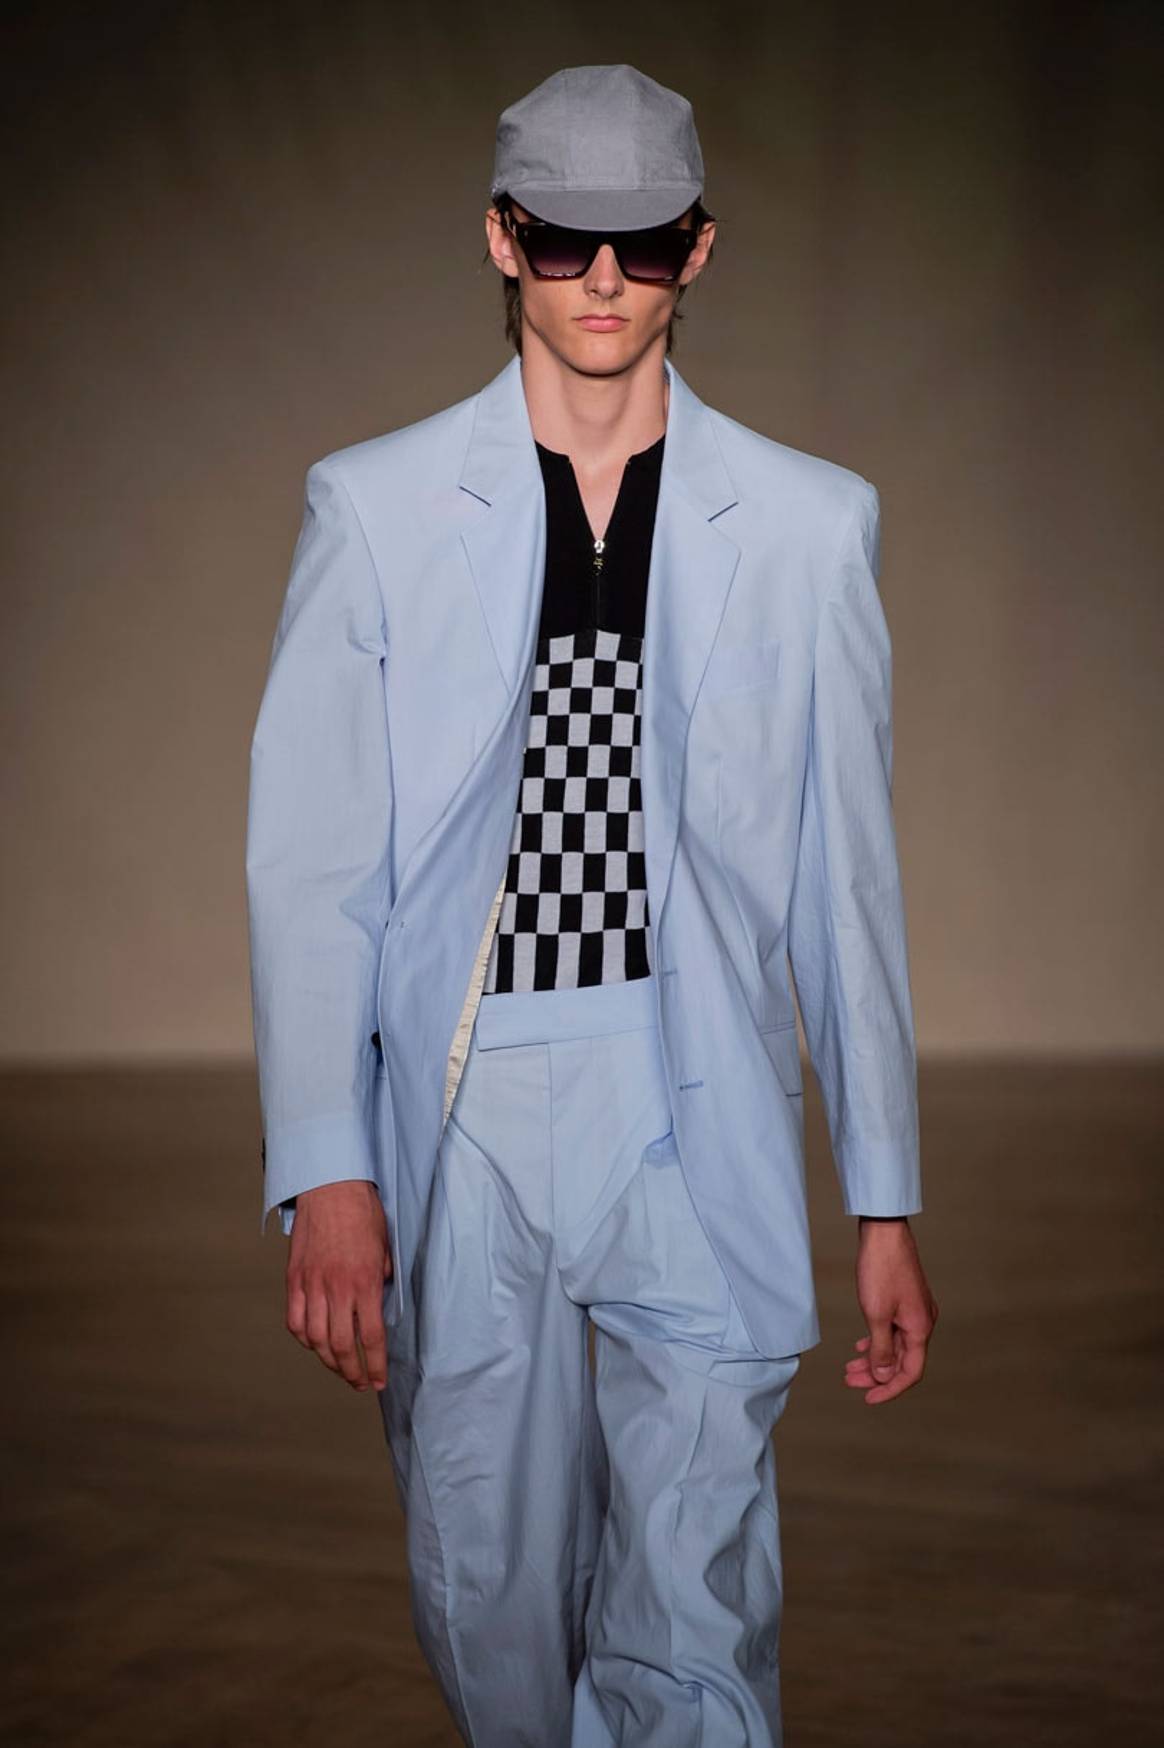 In Pictures: Paul Smith reinvigorates the suit at Paris Fashion Week